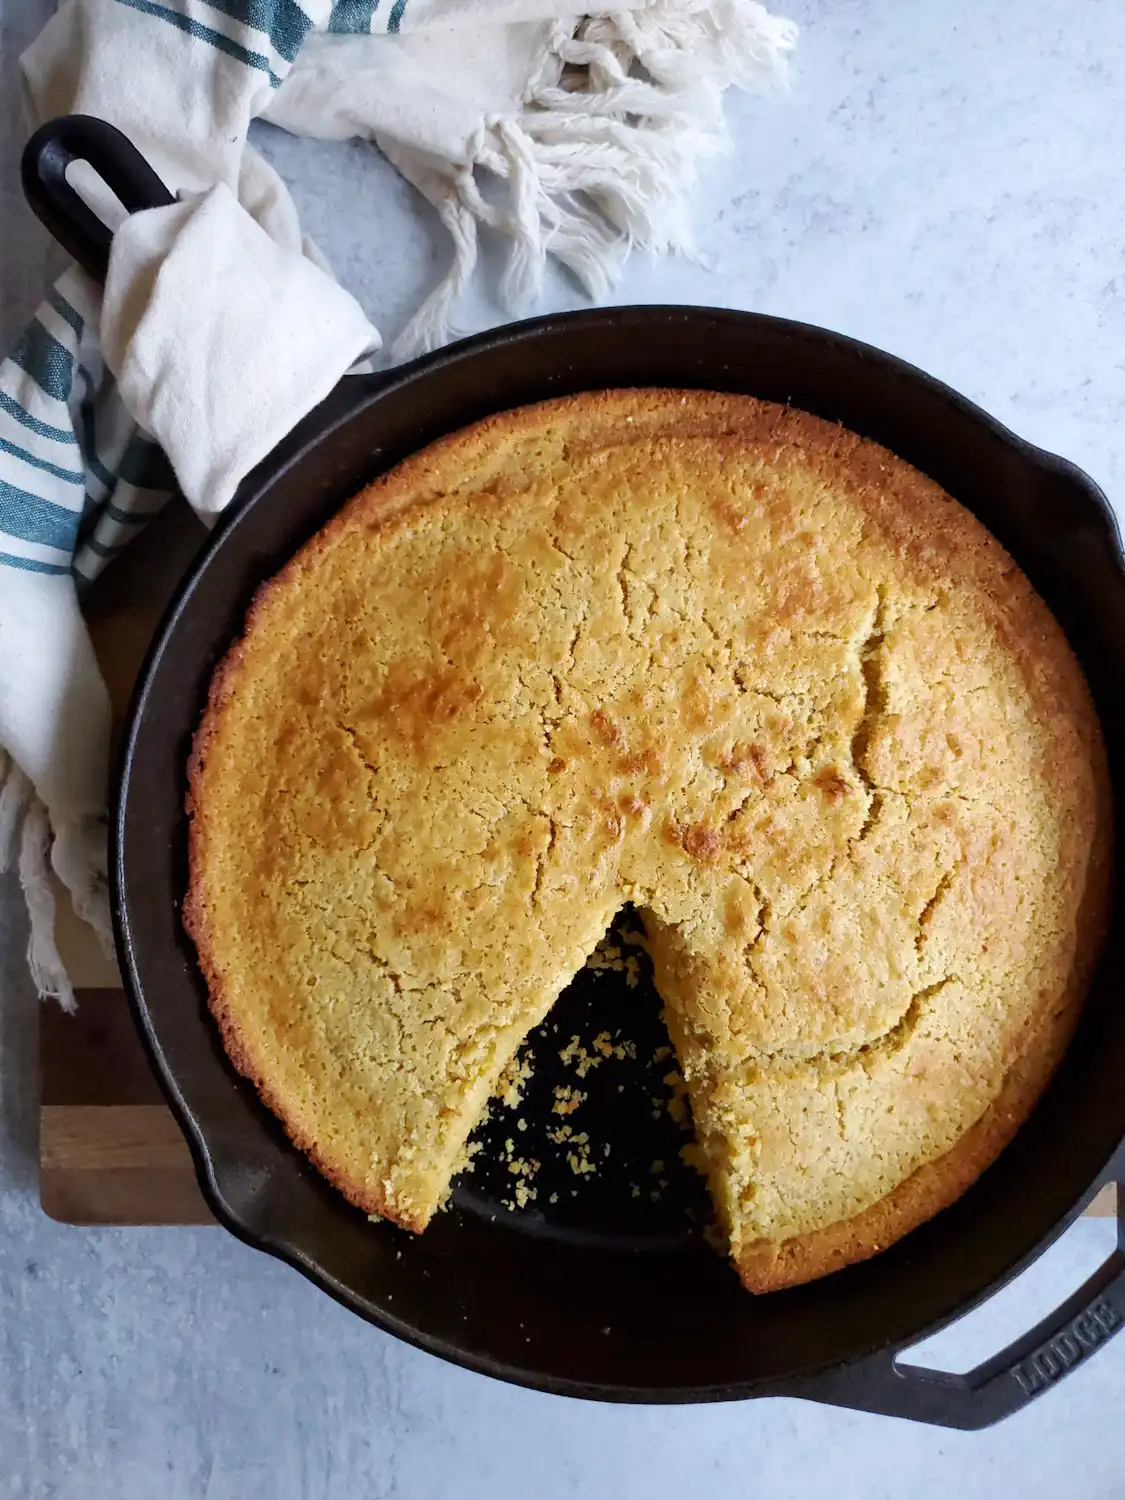 Sourdough cornbread after it has baked sitting in a cast iron skillet on top of a wood cutting board. A slice has been cut out of the cornbread as if it were a pie, leaving an empty triangular space behind, showing the black cast iron below.